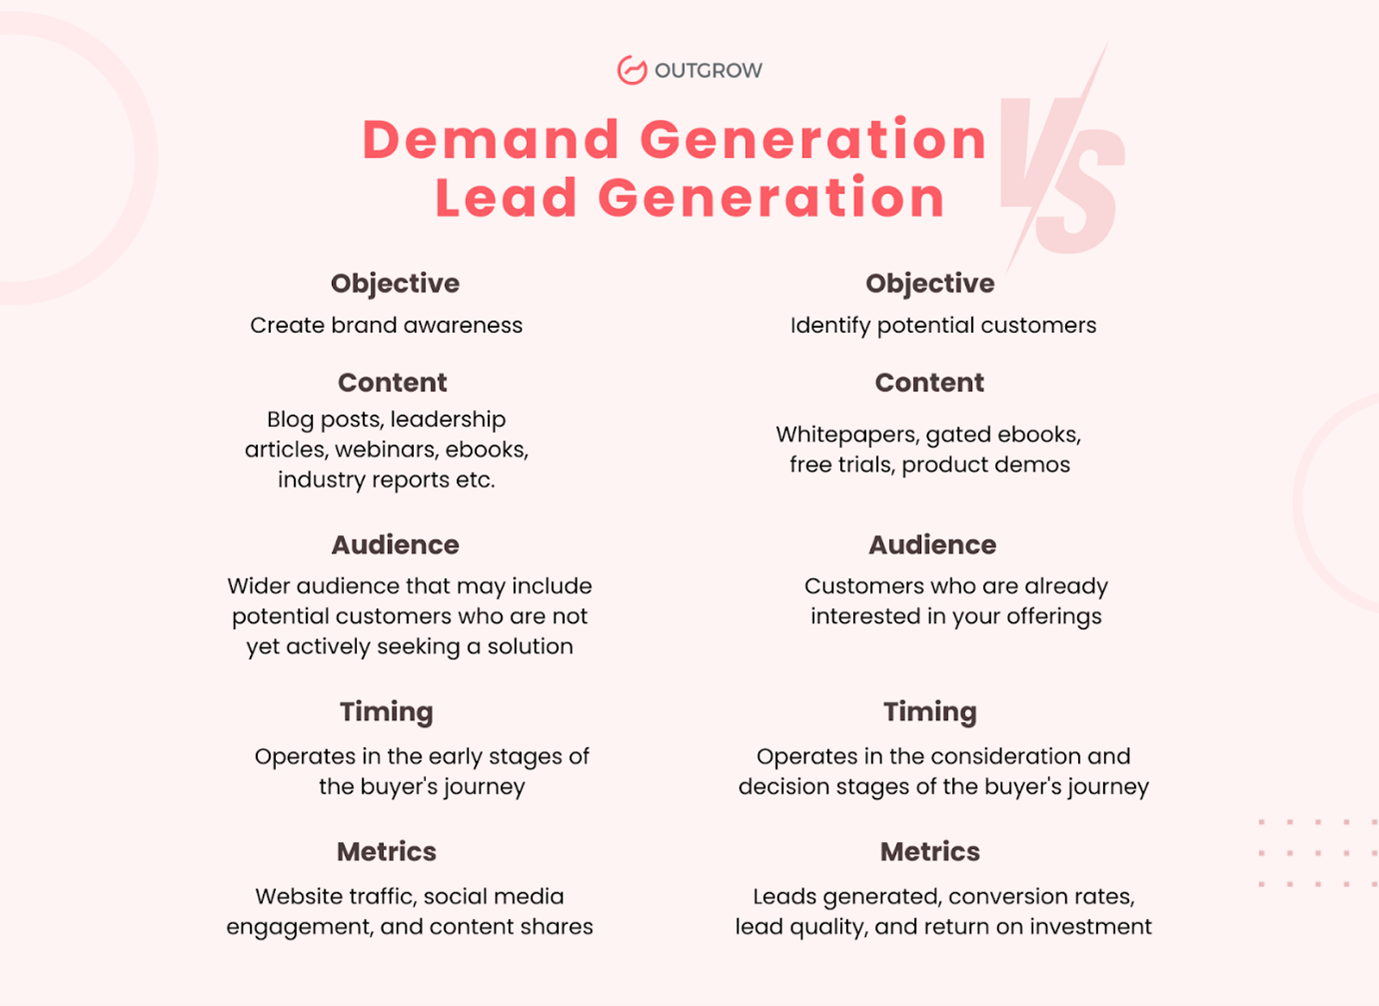 Differences between Demand Generation and Lead generation